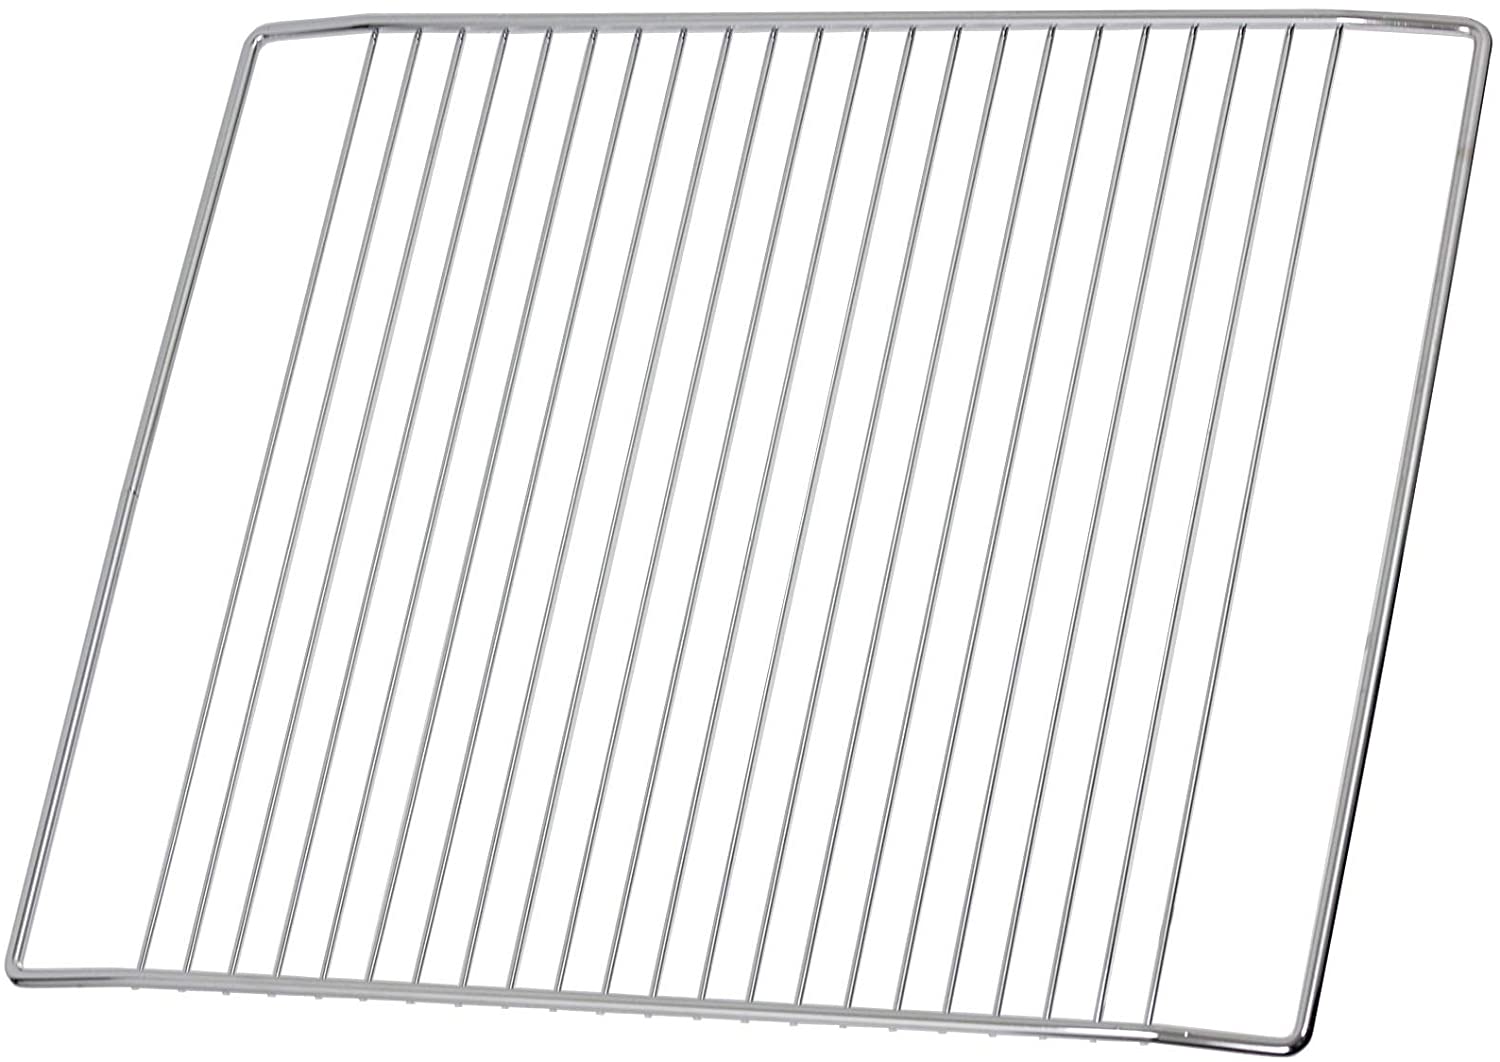 Wire Shelf Rack for BEKO Oven Cooker Grill 463 x 360 mm